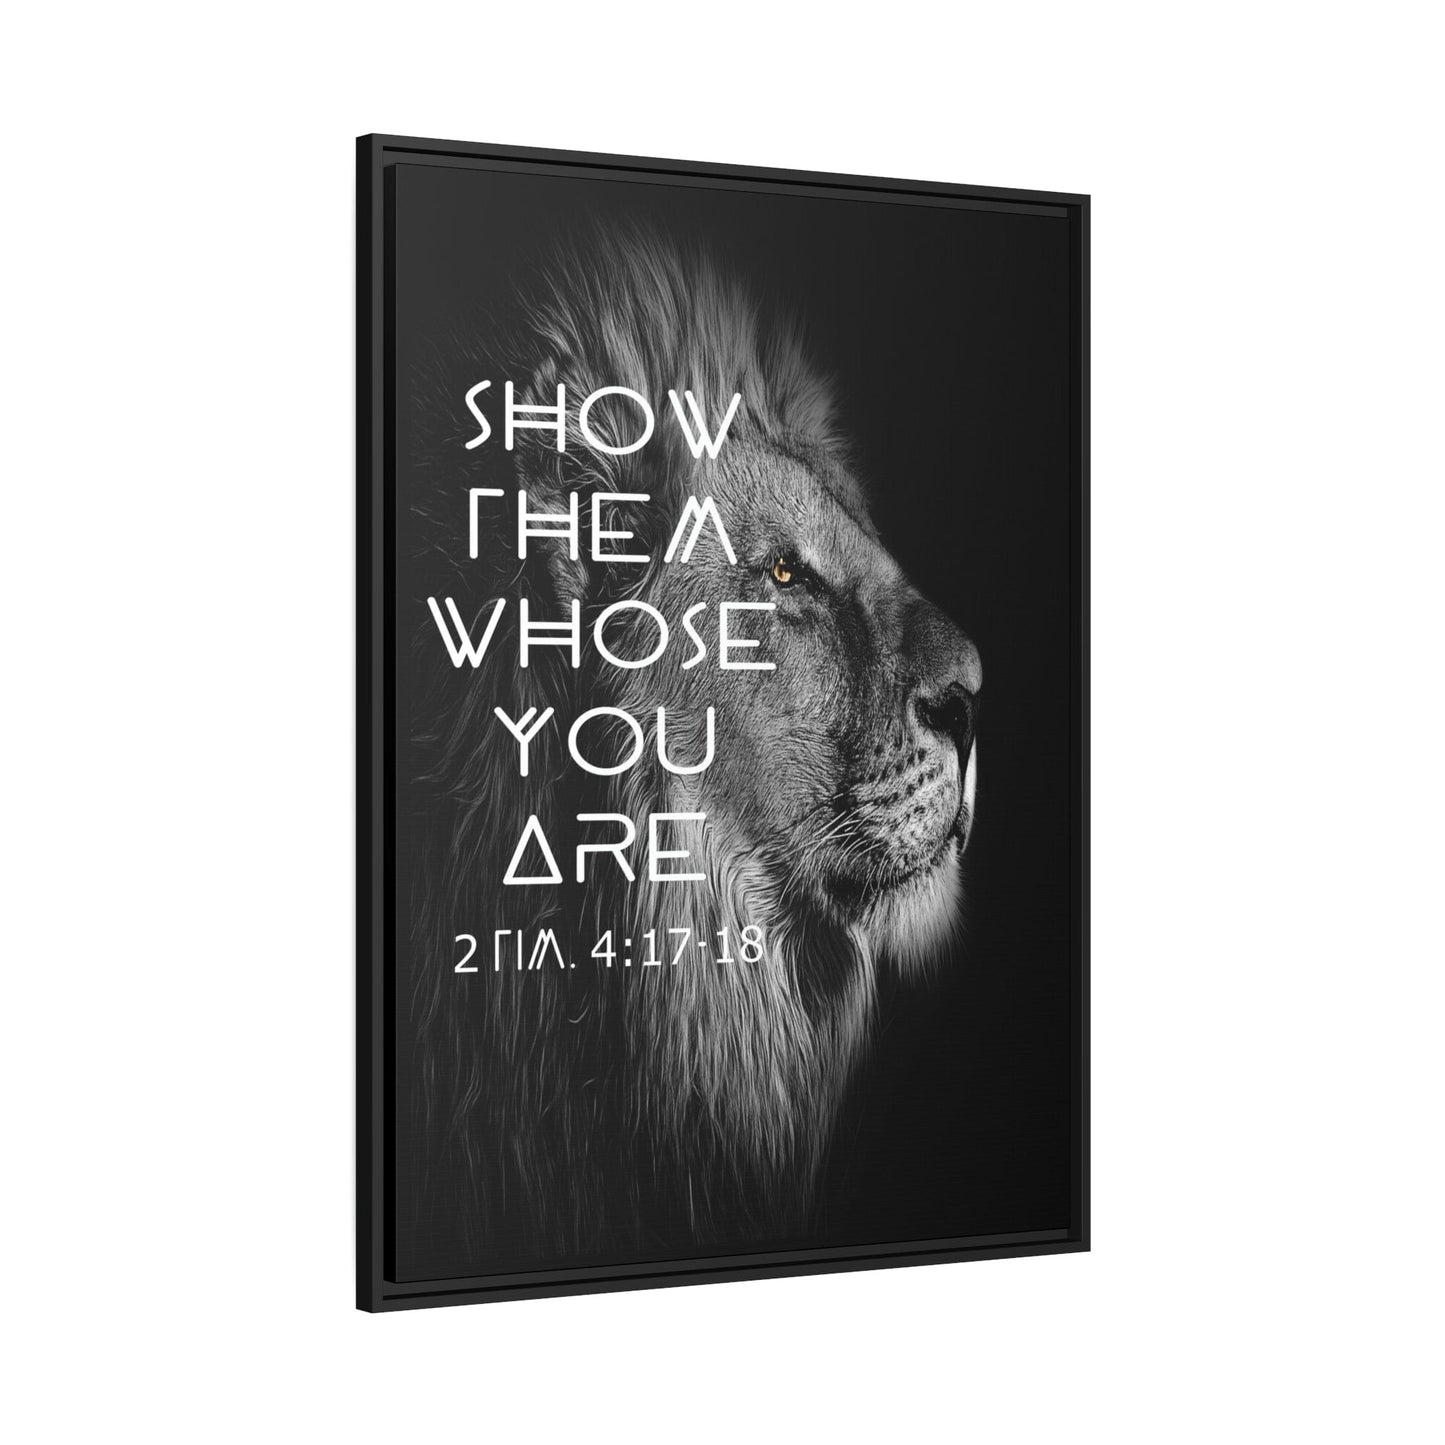 Printify Canvas Show Them Whose You Are - 2 Tim 4:17-18 Christian Canvas Wall Art